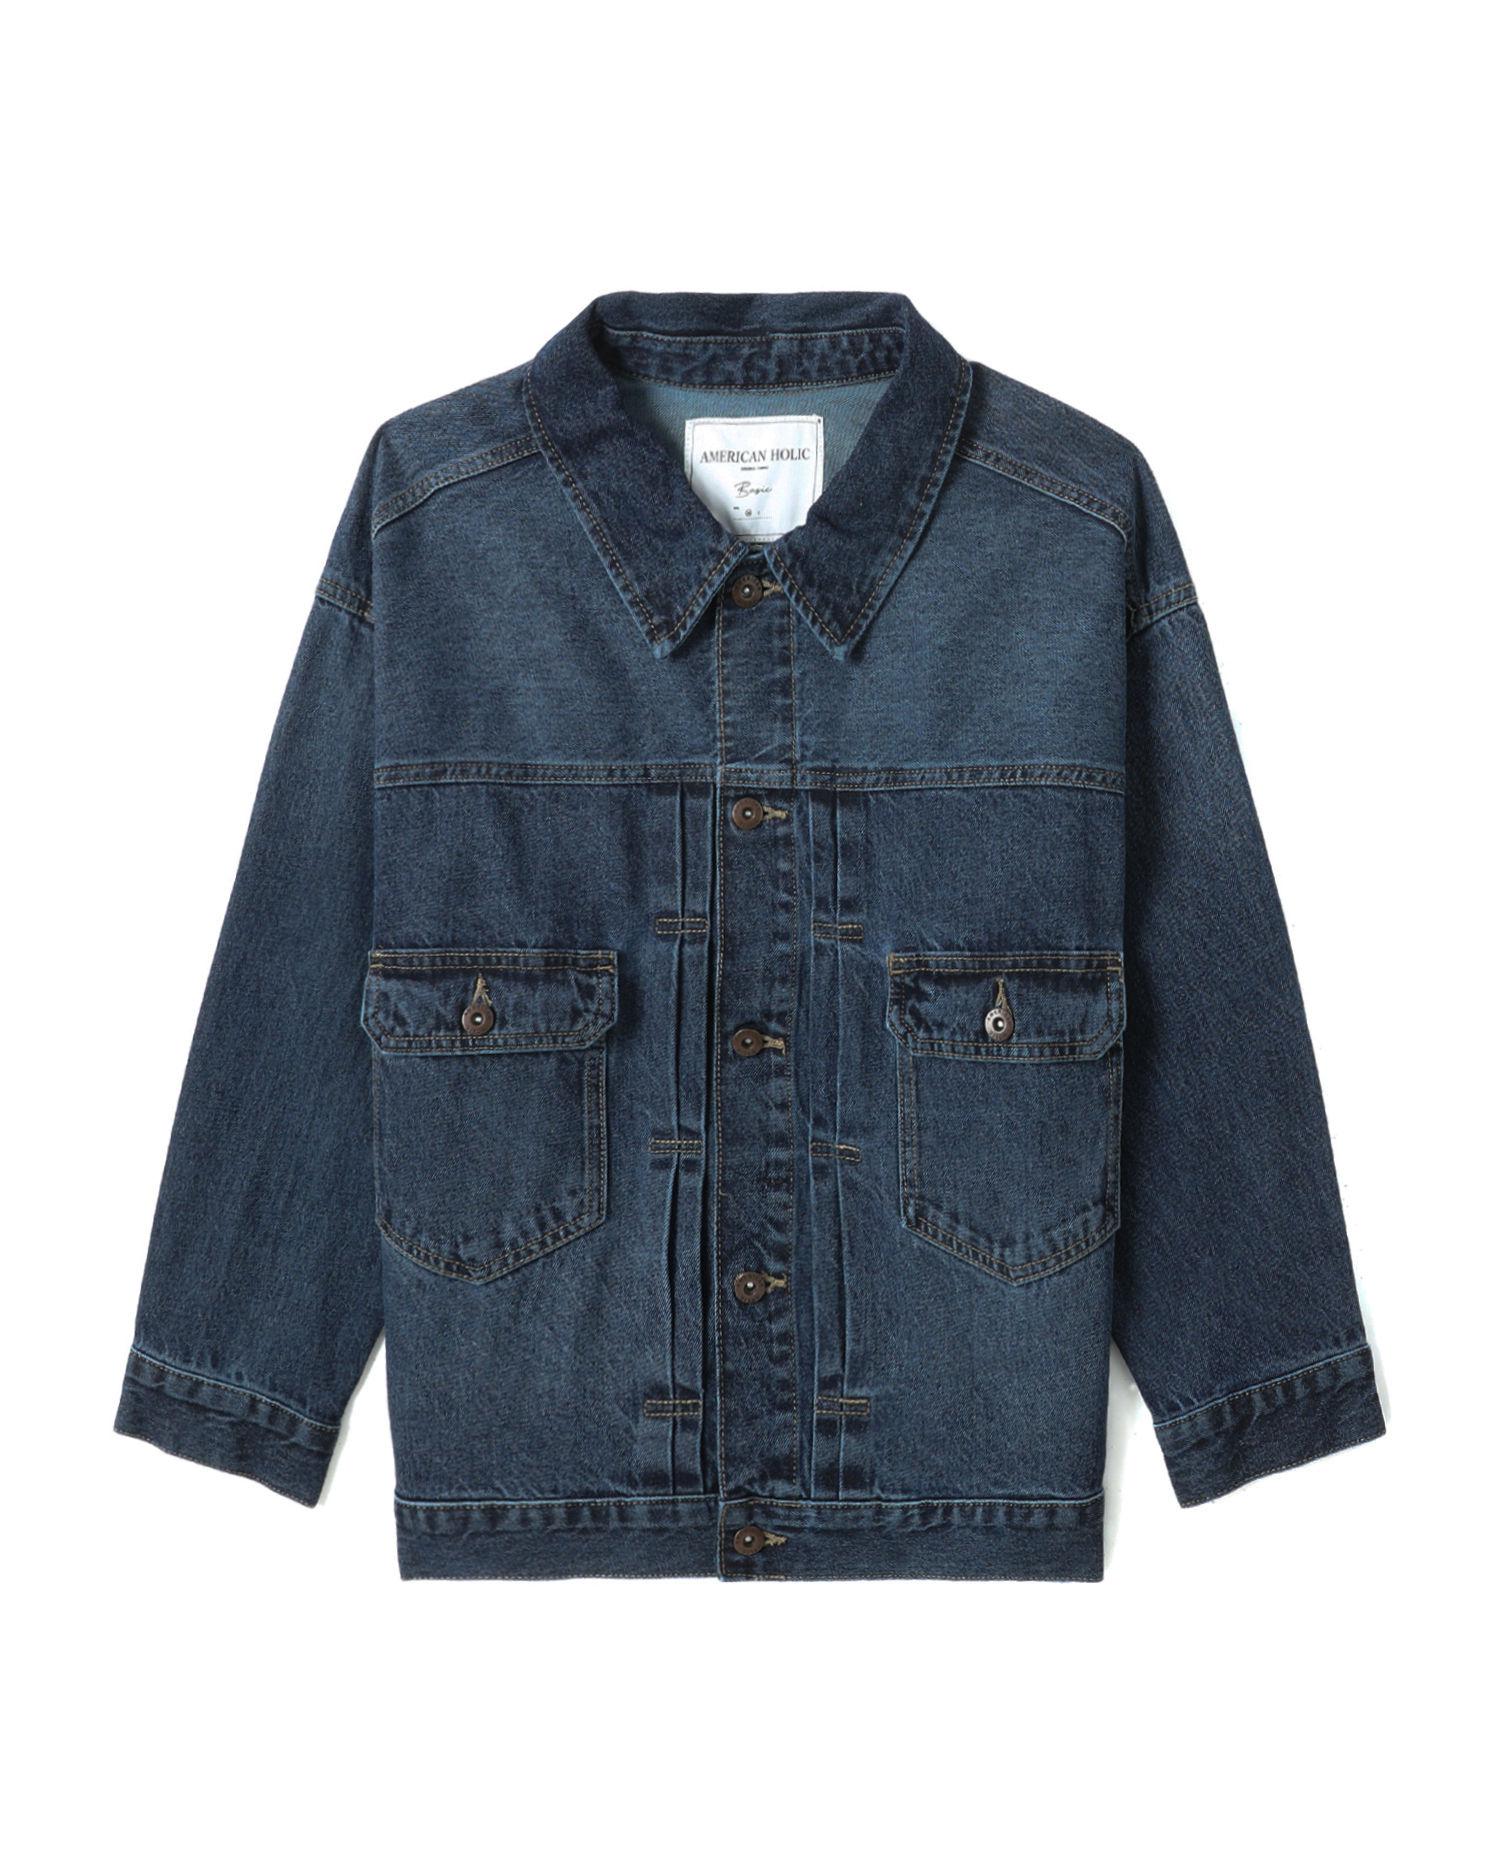 Relaxed denim jacket by AMERICAN HOLIC